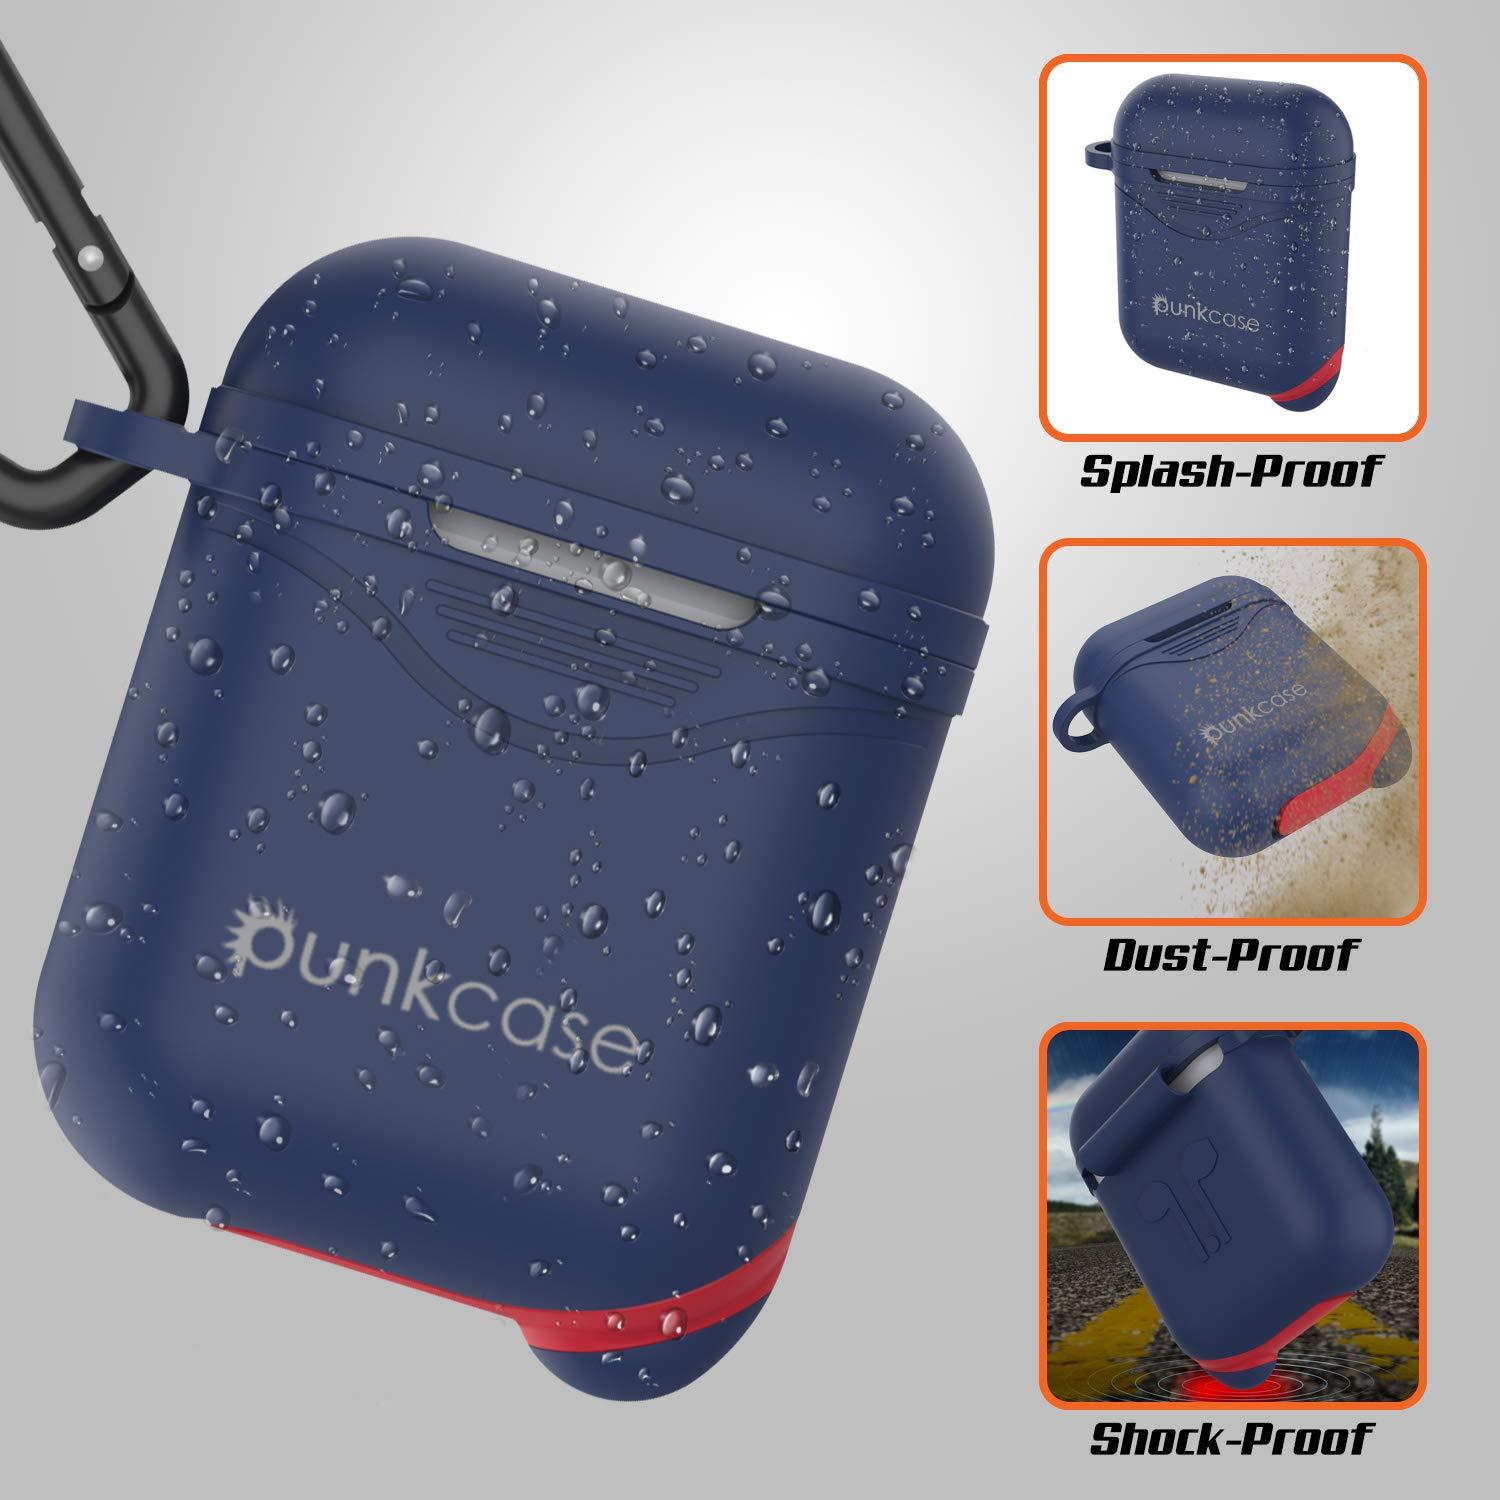 Punkcase Airpod Case with Keychain (Navy-Blue)